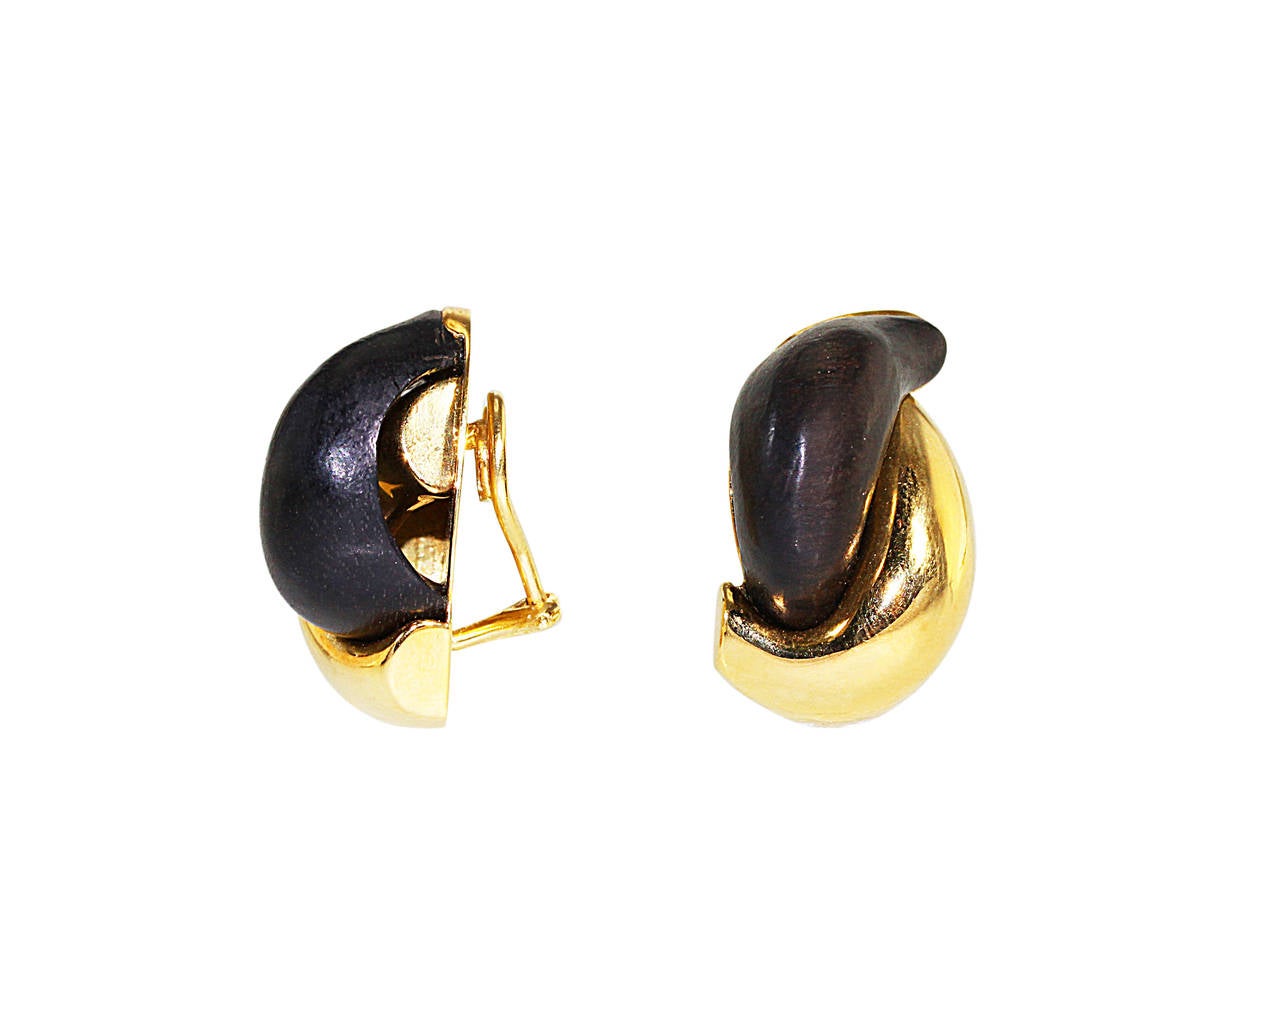 Pair of 18 karat gold and wood earclips by Seaman Schepps, designed as interlocking curves of polished gold and carved wood, gross weight 28.3 grams, measuring 1 1/8 by 7/8 inches, signed Seaman Schepps, with maker's mark, stamped 750.  A great pair